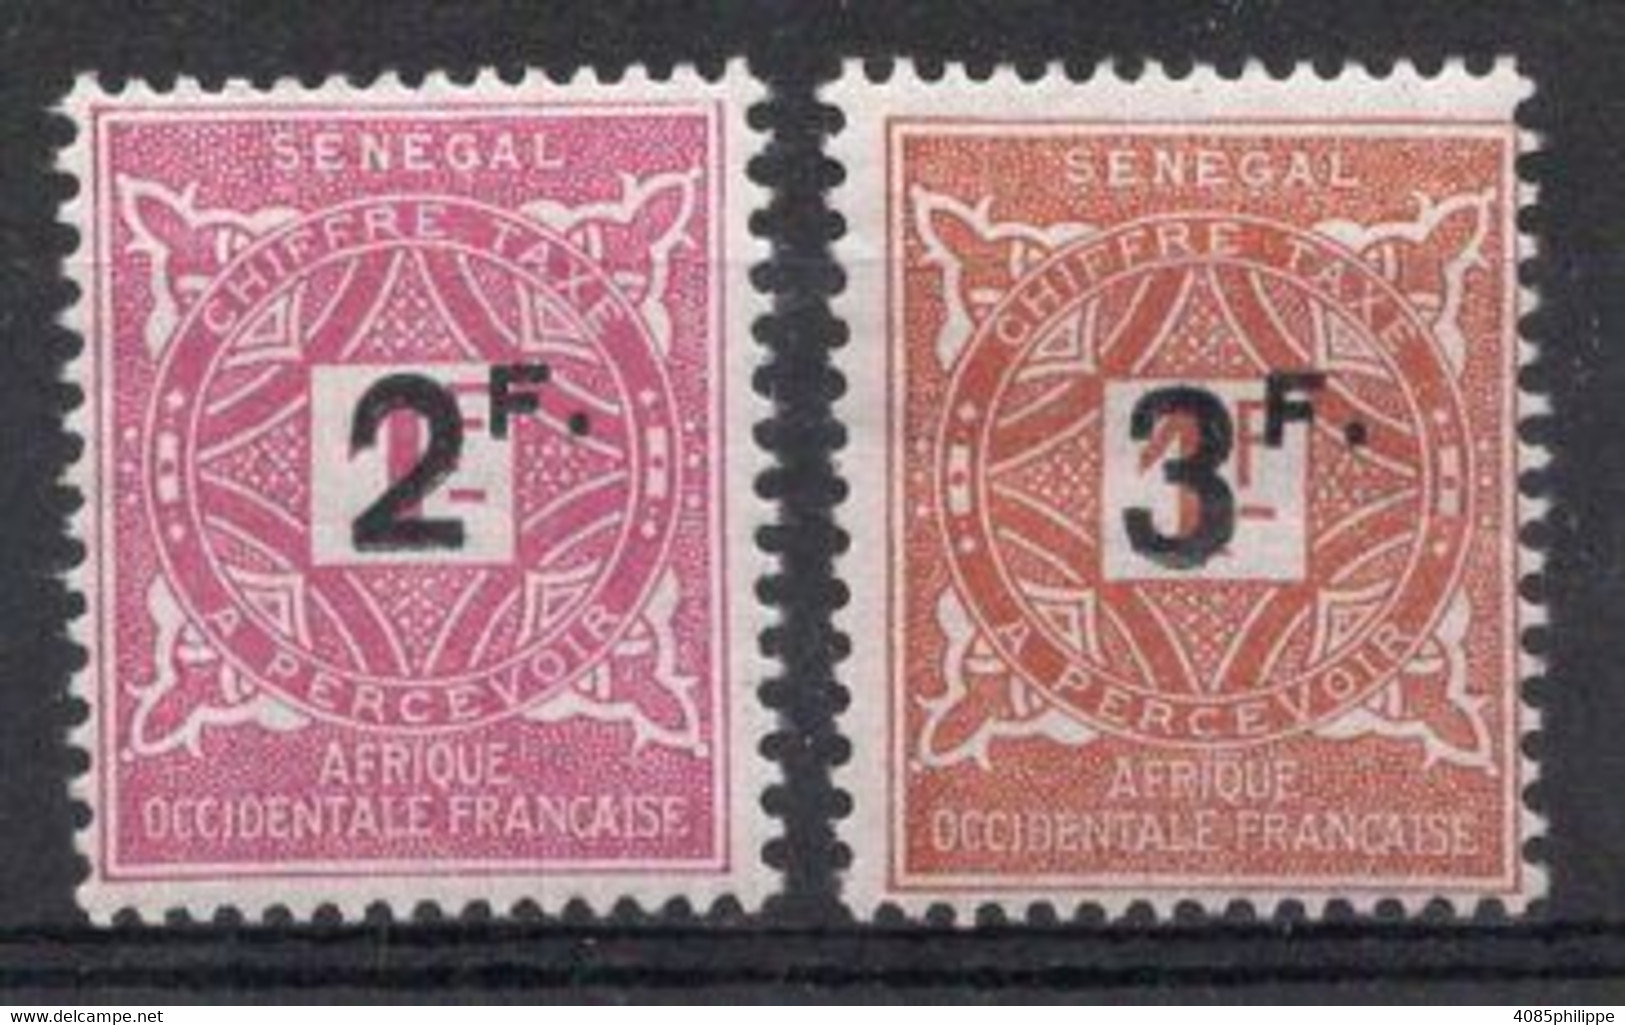 SENEGAL Timbres Taxe  N°20* & N°21* Neufs Charnières TB Cote : 21,00€ - Timbres-taxe